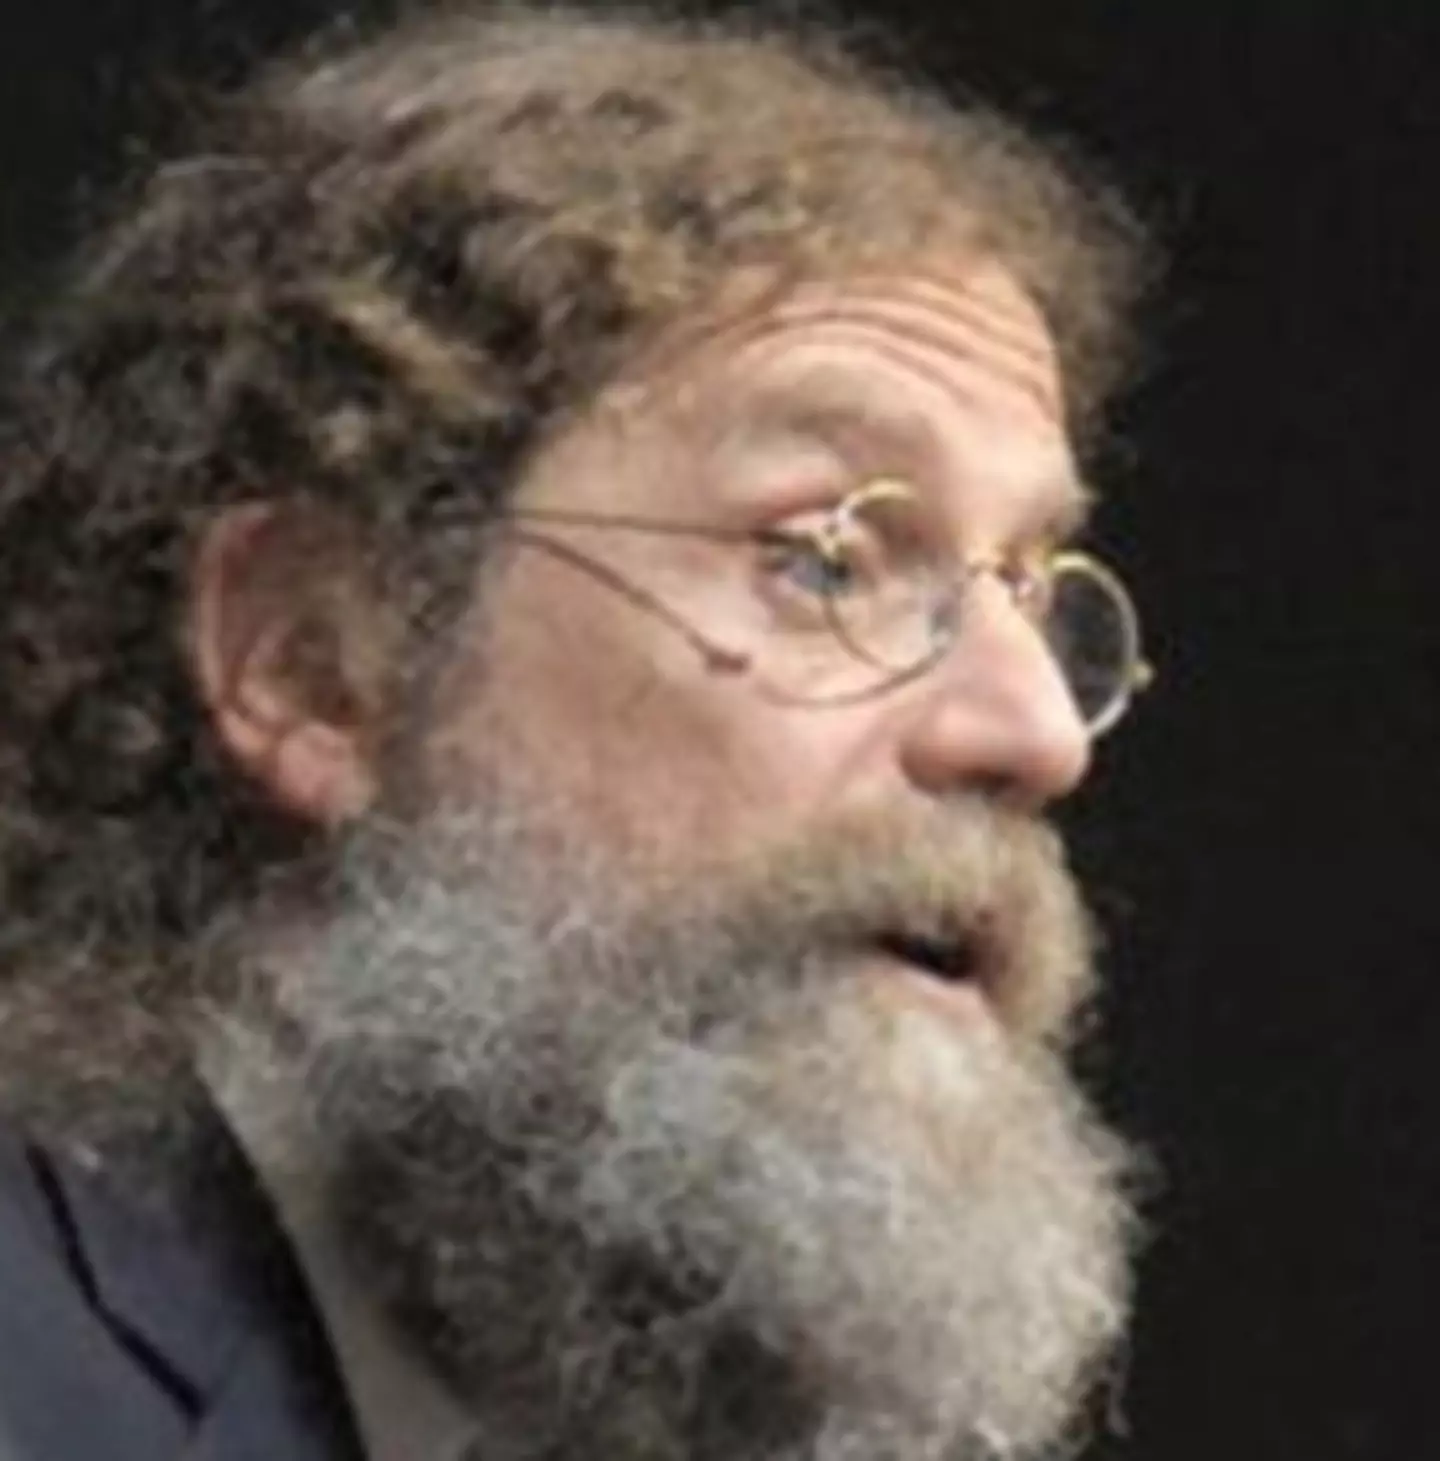 Robert Sapolsky doesn't believe humans have free will.